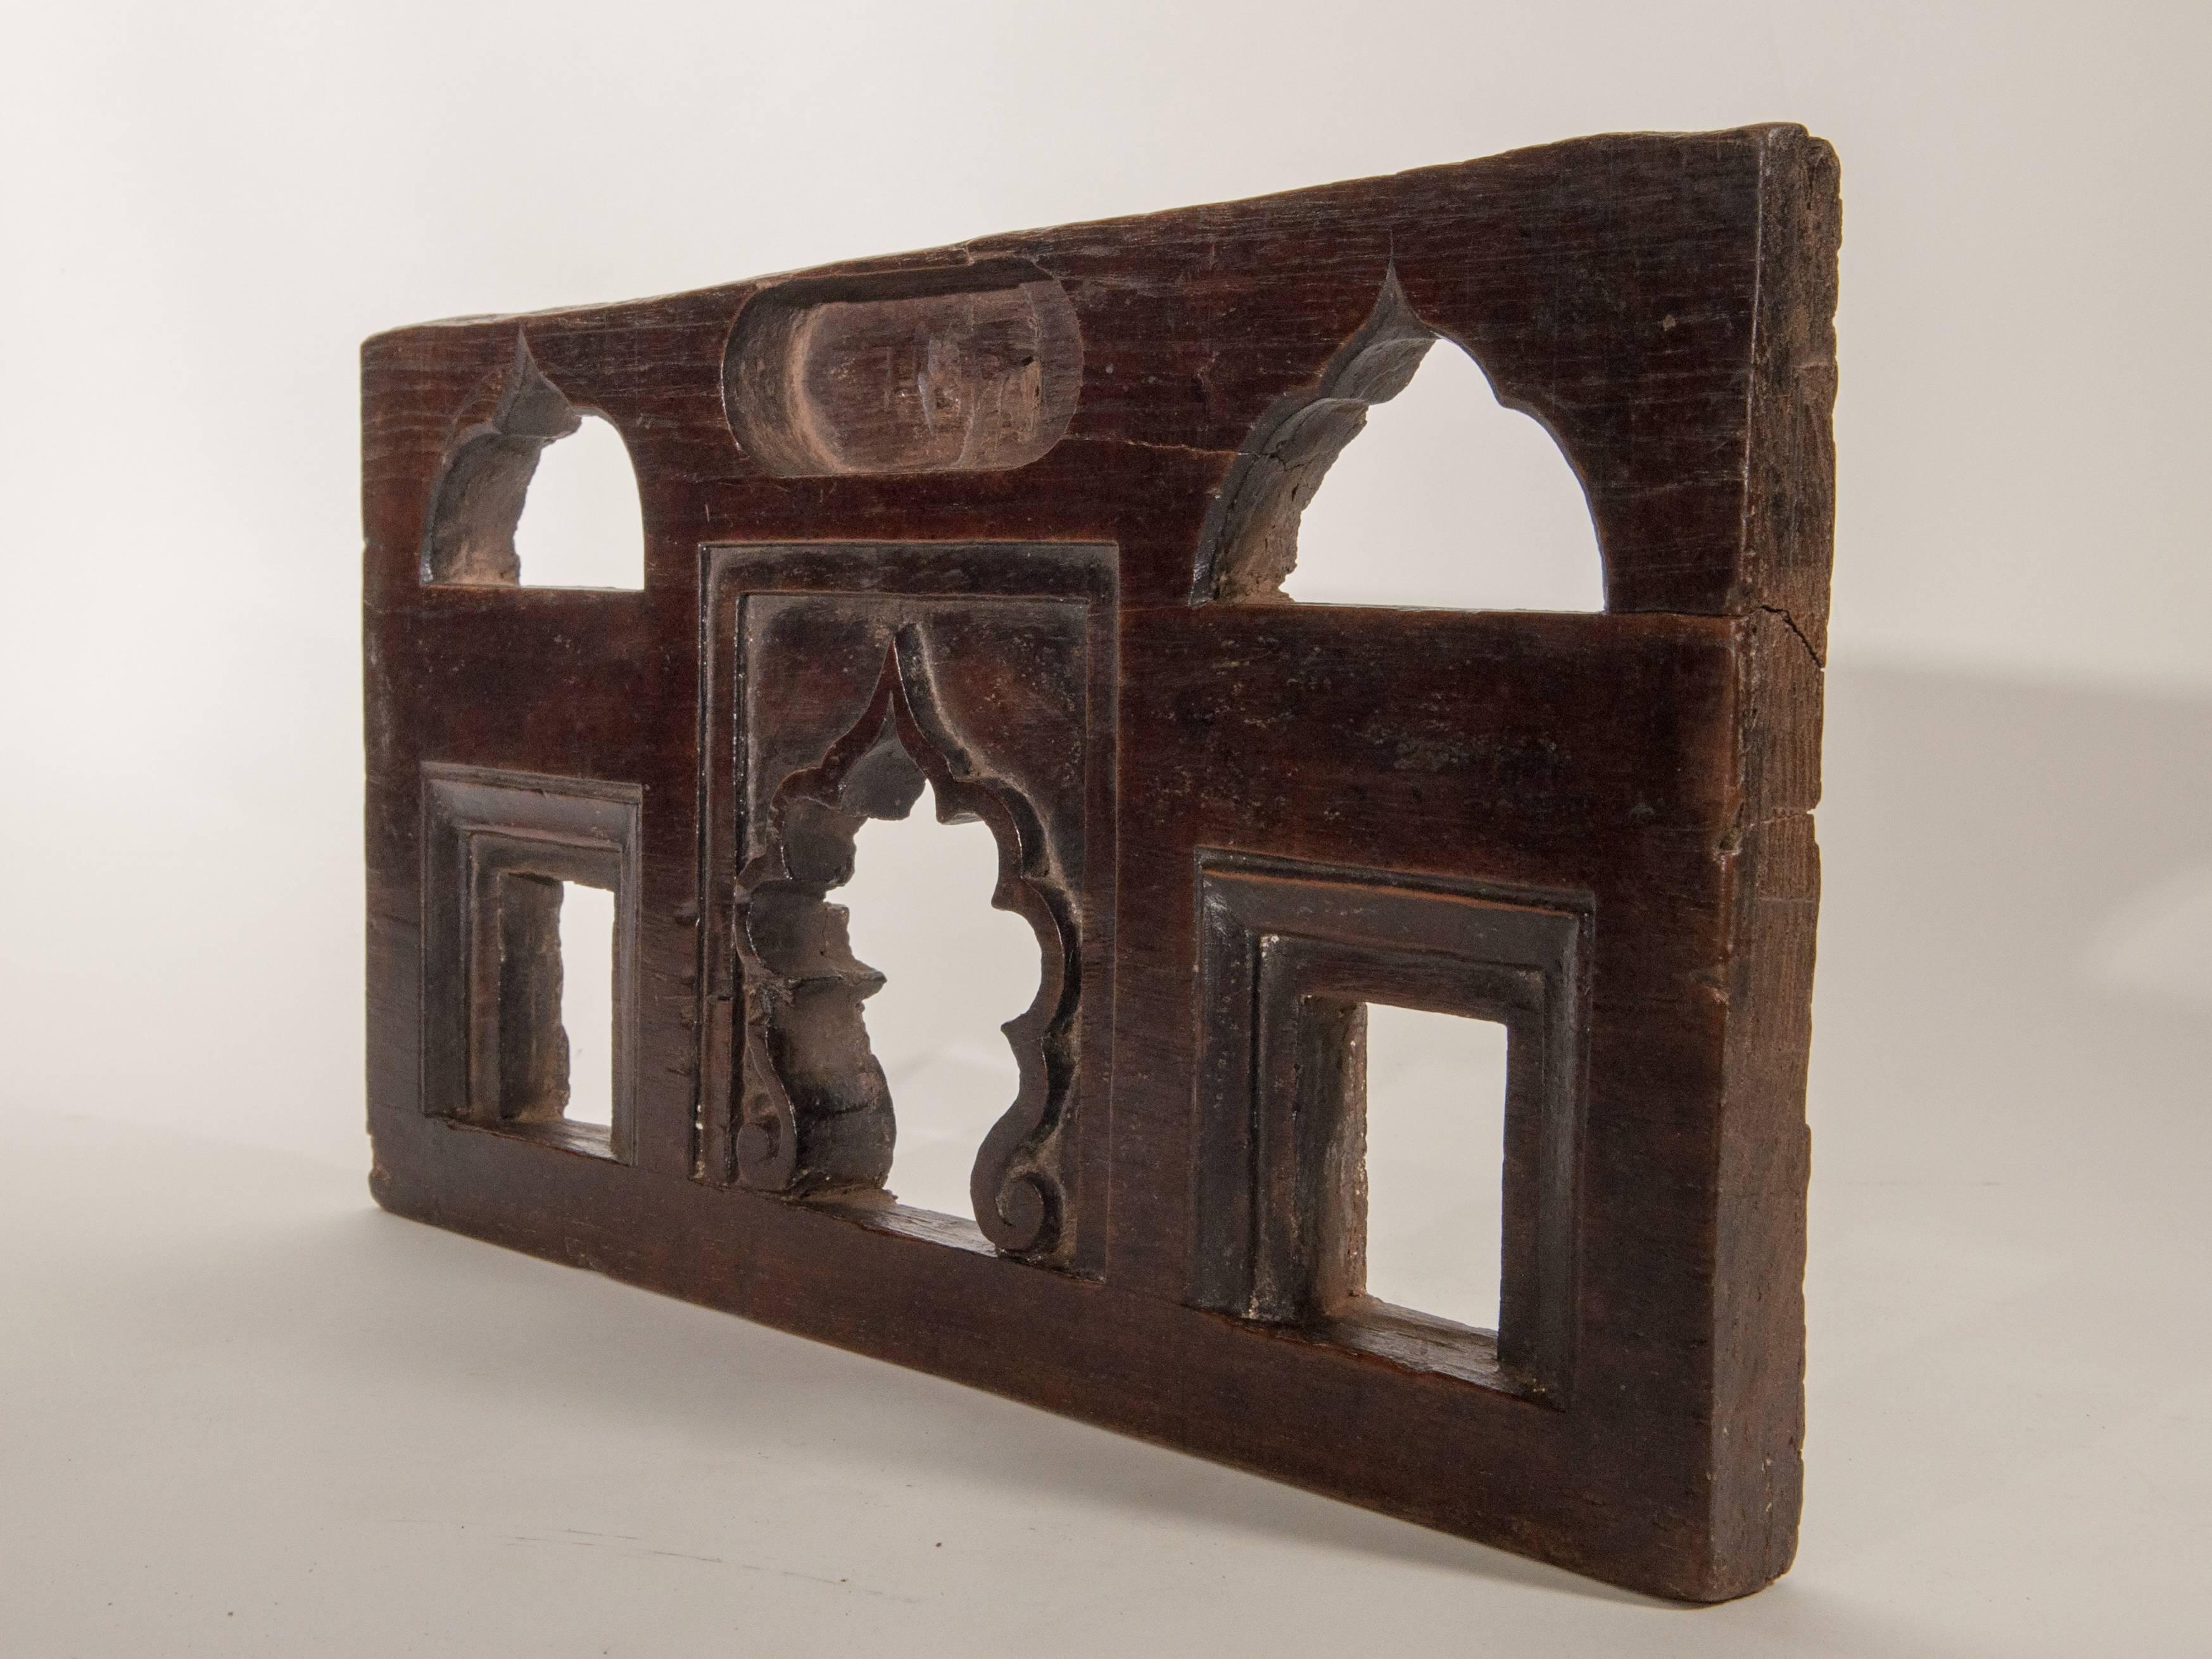 Vintage miniature architectural votive and picture frame, mid-20th century, India.
This vintage hand-carved wooden frame, from South India, was used to hold a small statue or picture of a Hindu Diety, very often a Garuda. It would have been placed